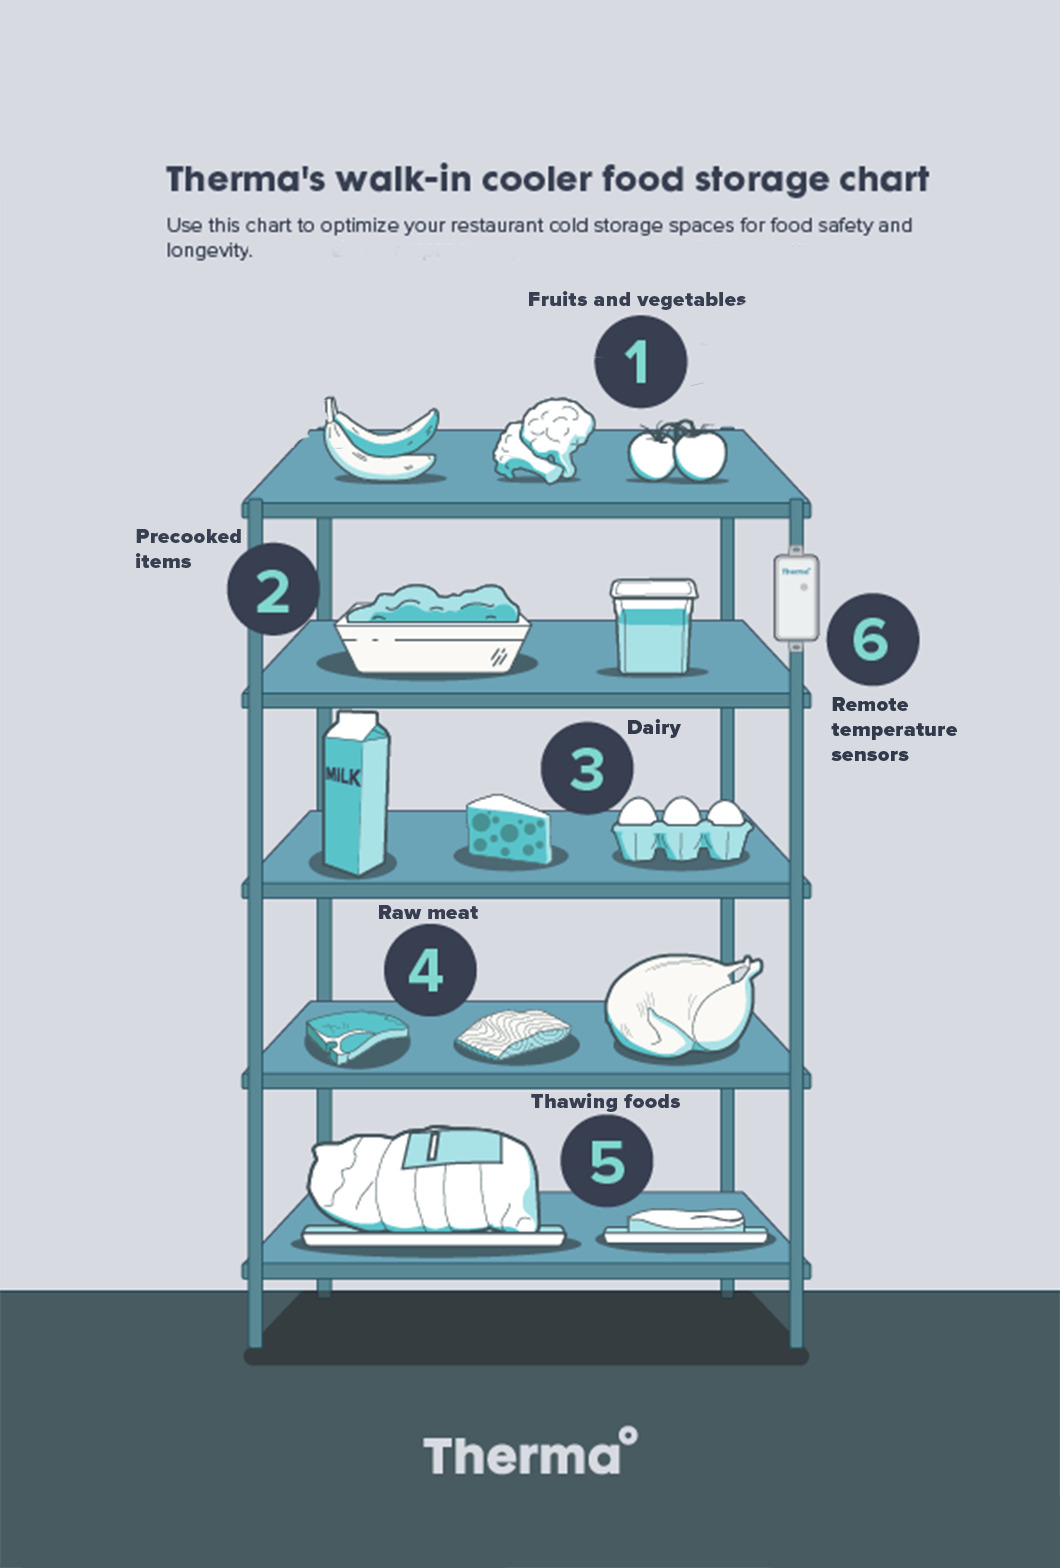 Cold storage units, such as this walk-in cooler, need to be organized correctly to optimize food safety and longevity. Use our Walk-In Cooler Food Storage Chart to save money and comply with legal ordinances. 